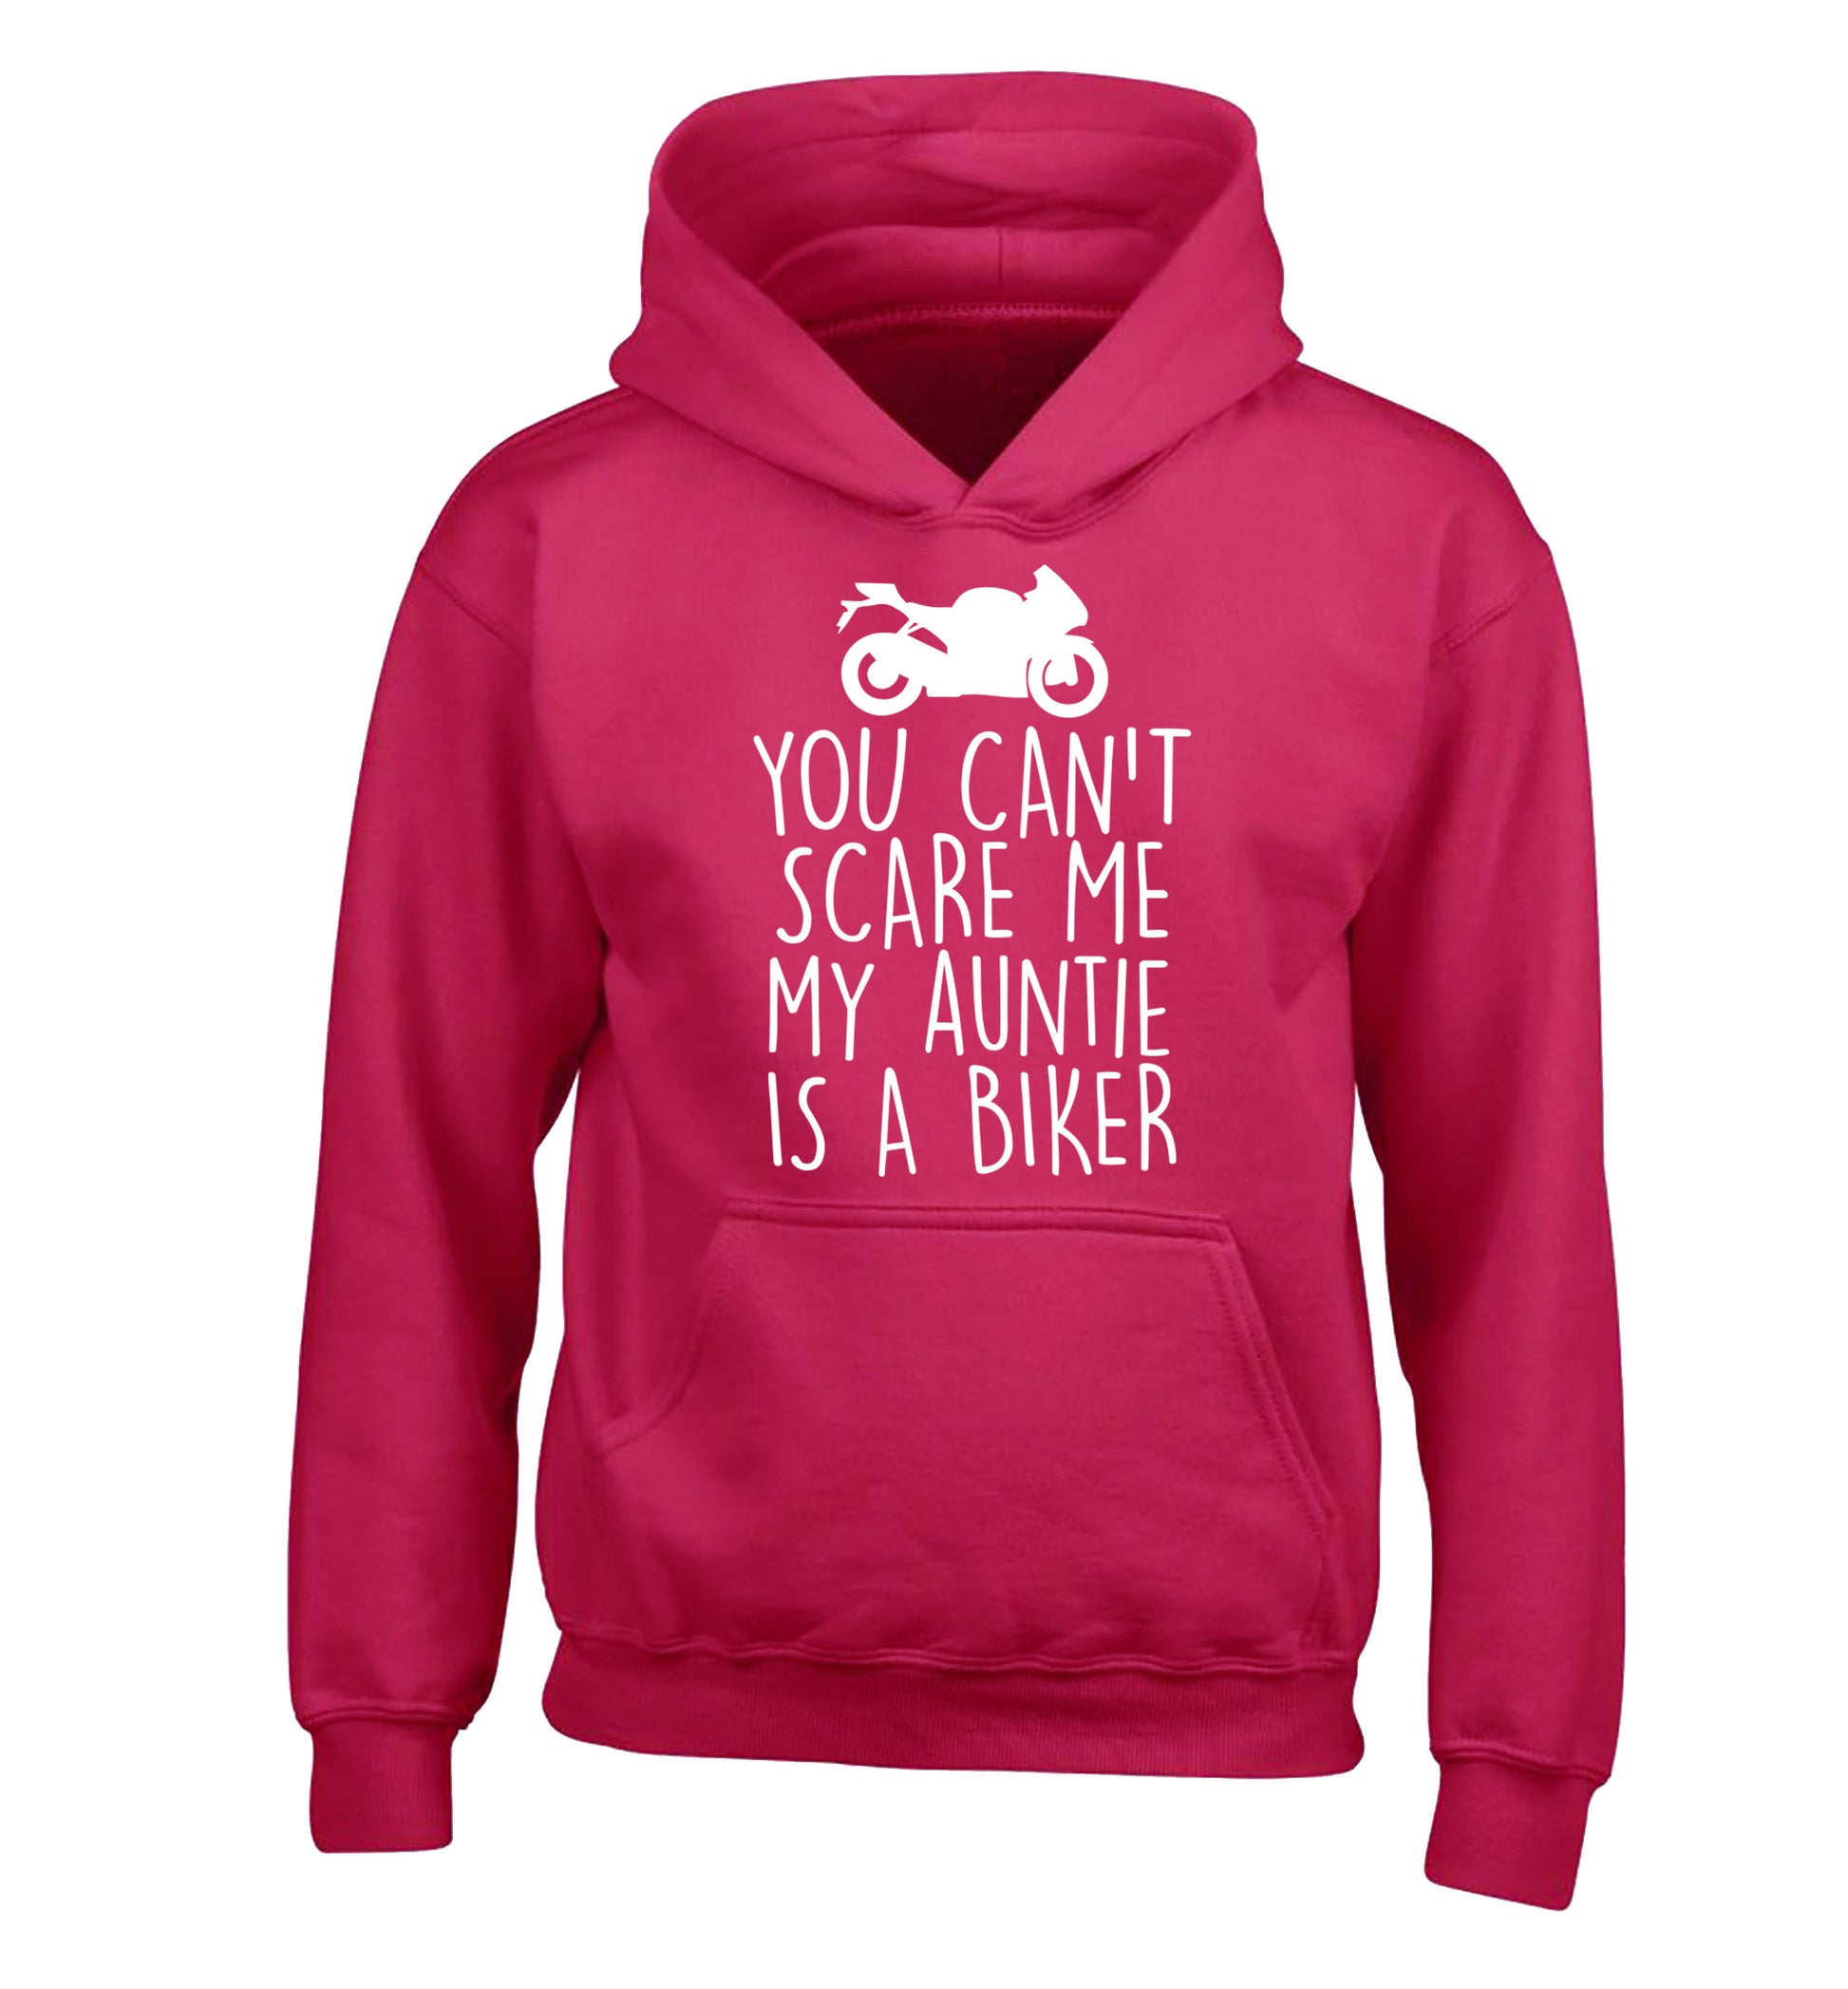 You can't scare me my auntie is a biker children's pink hoodie 12-13 Years